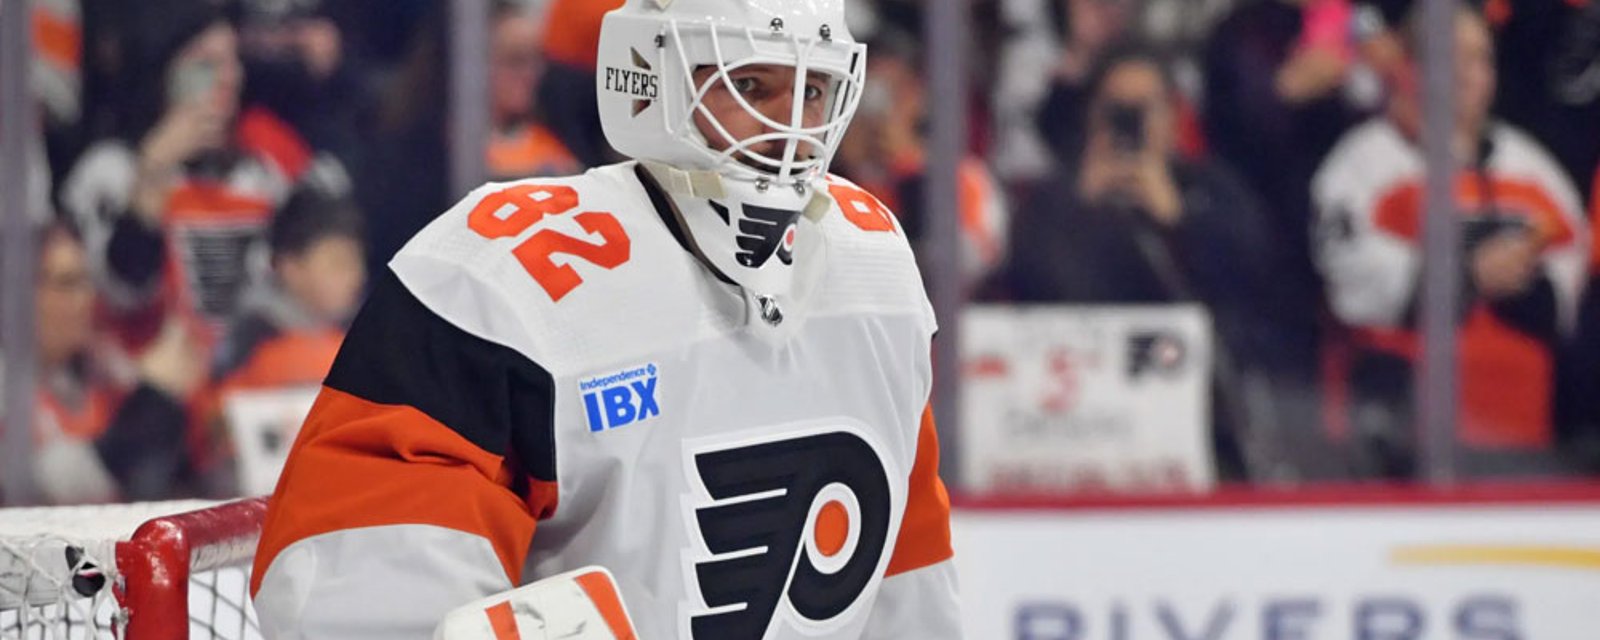 Flyers sign Fedotov to $6.5 million deal